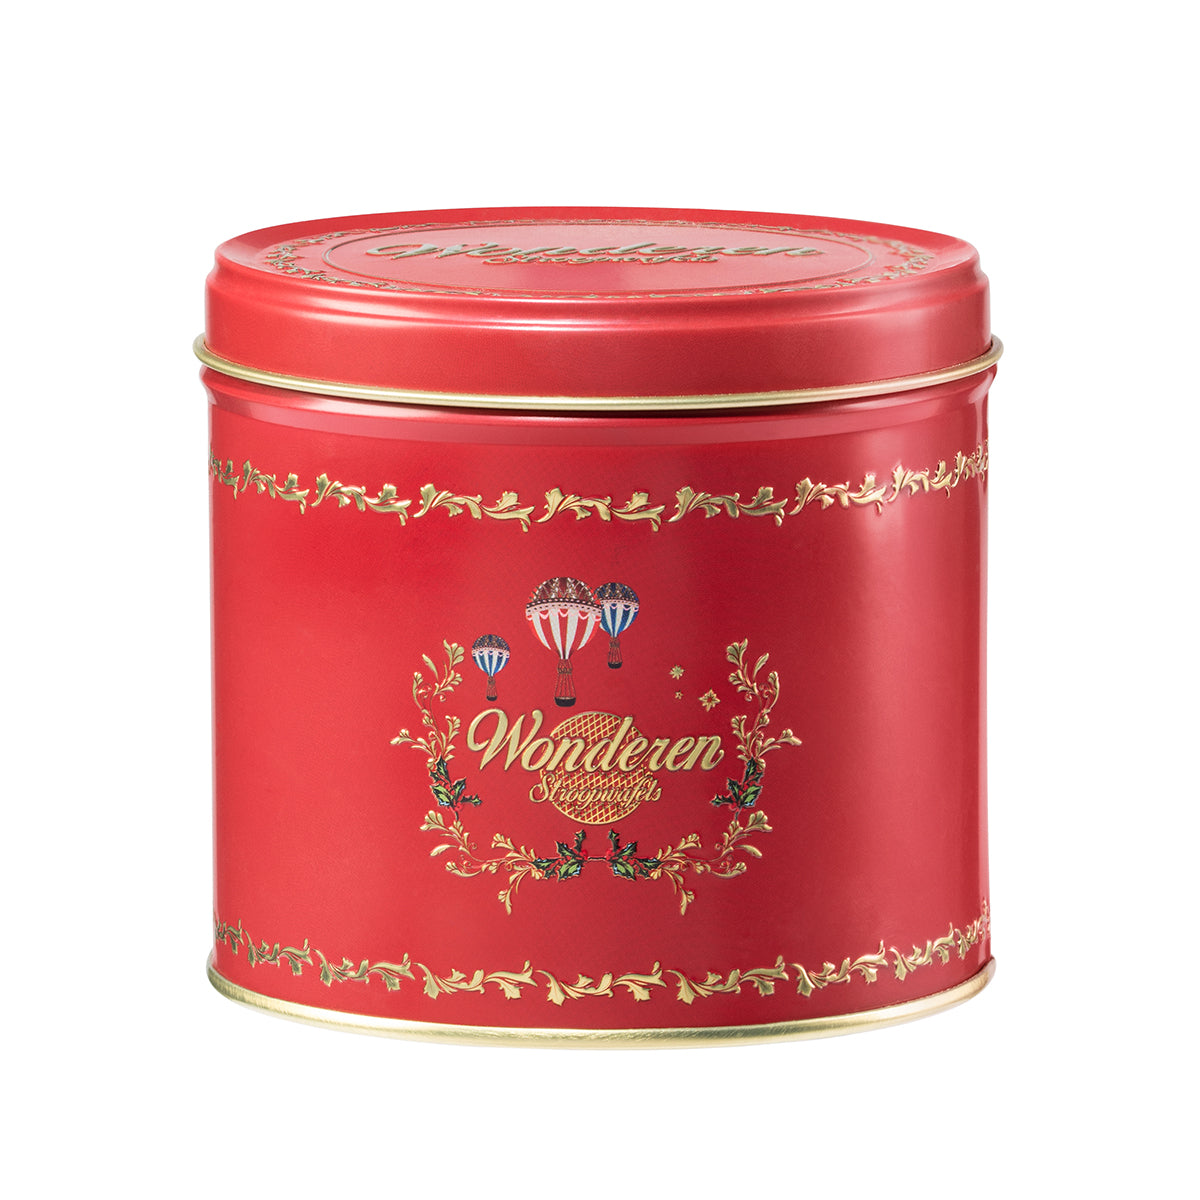 A red tin with the word Wonderen Stroopwafels on it.